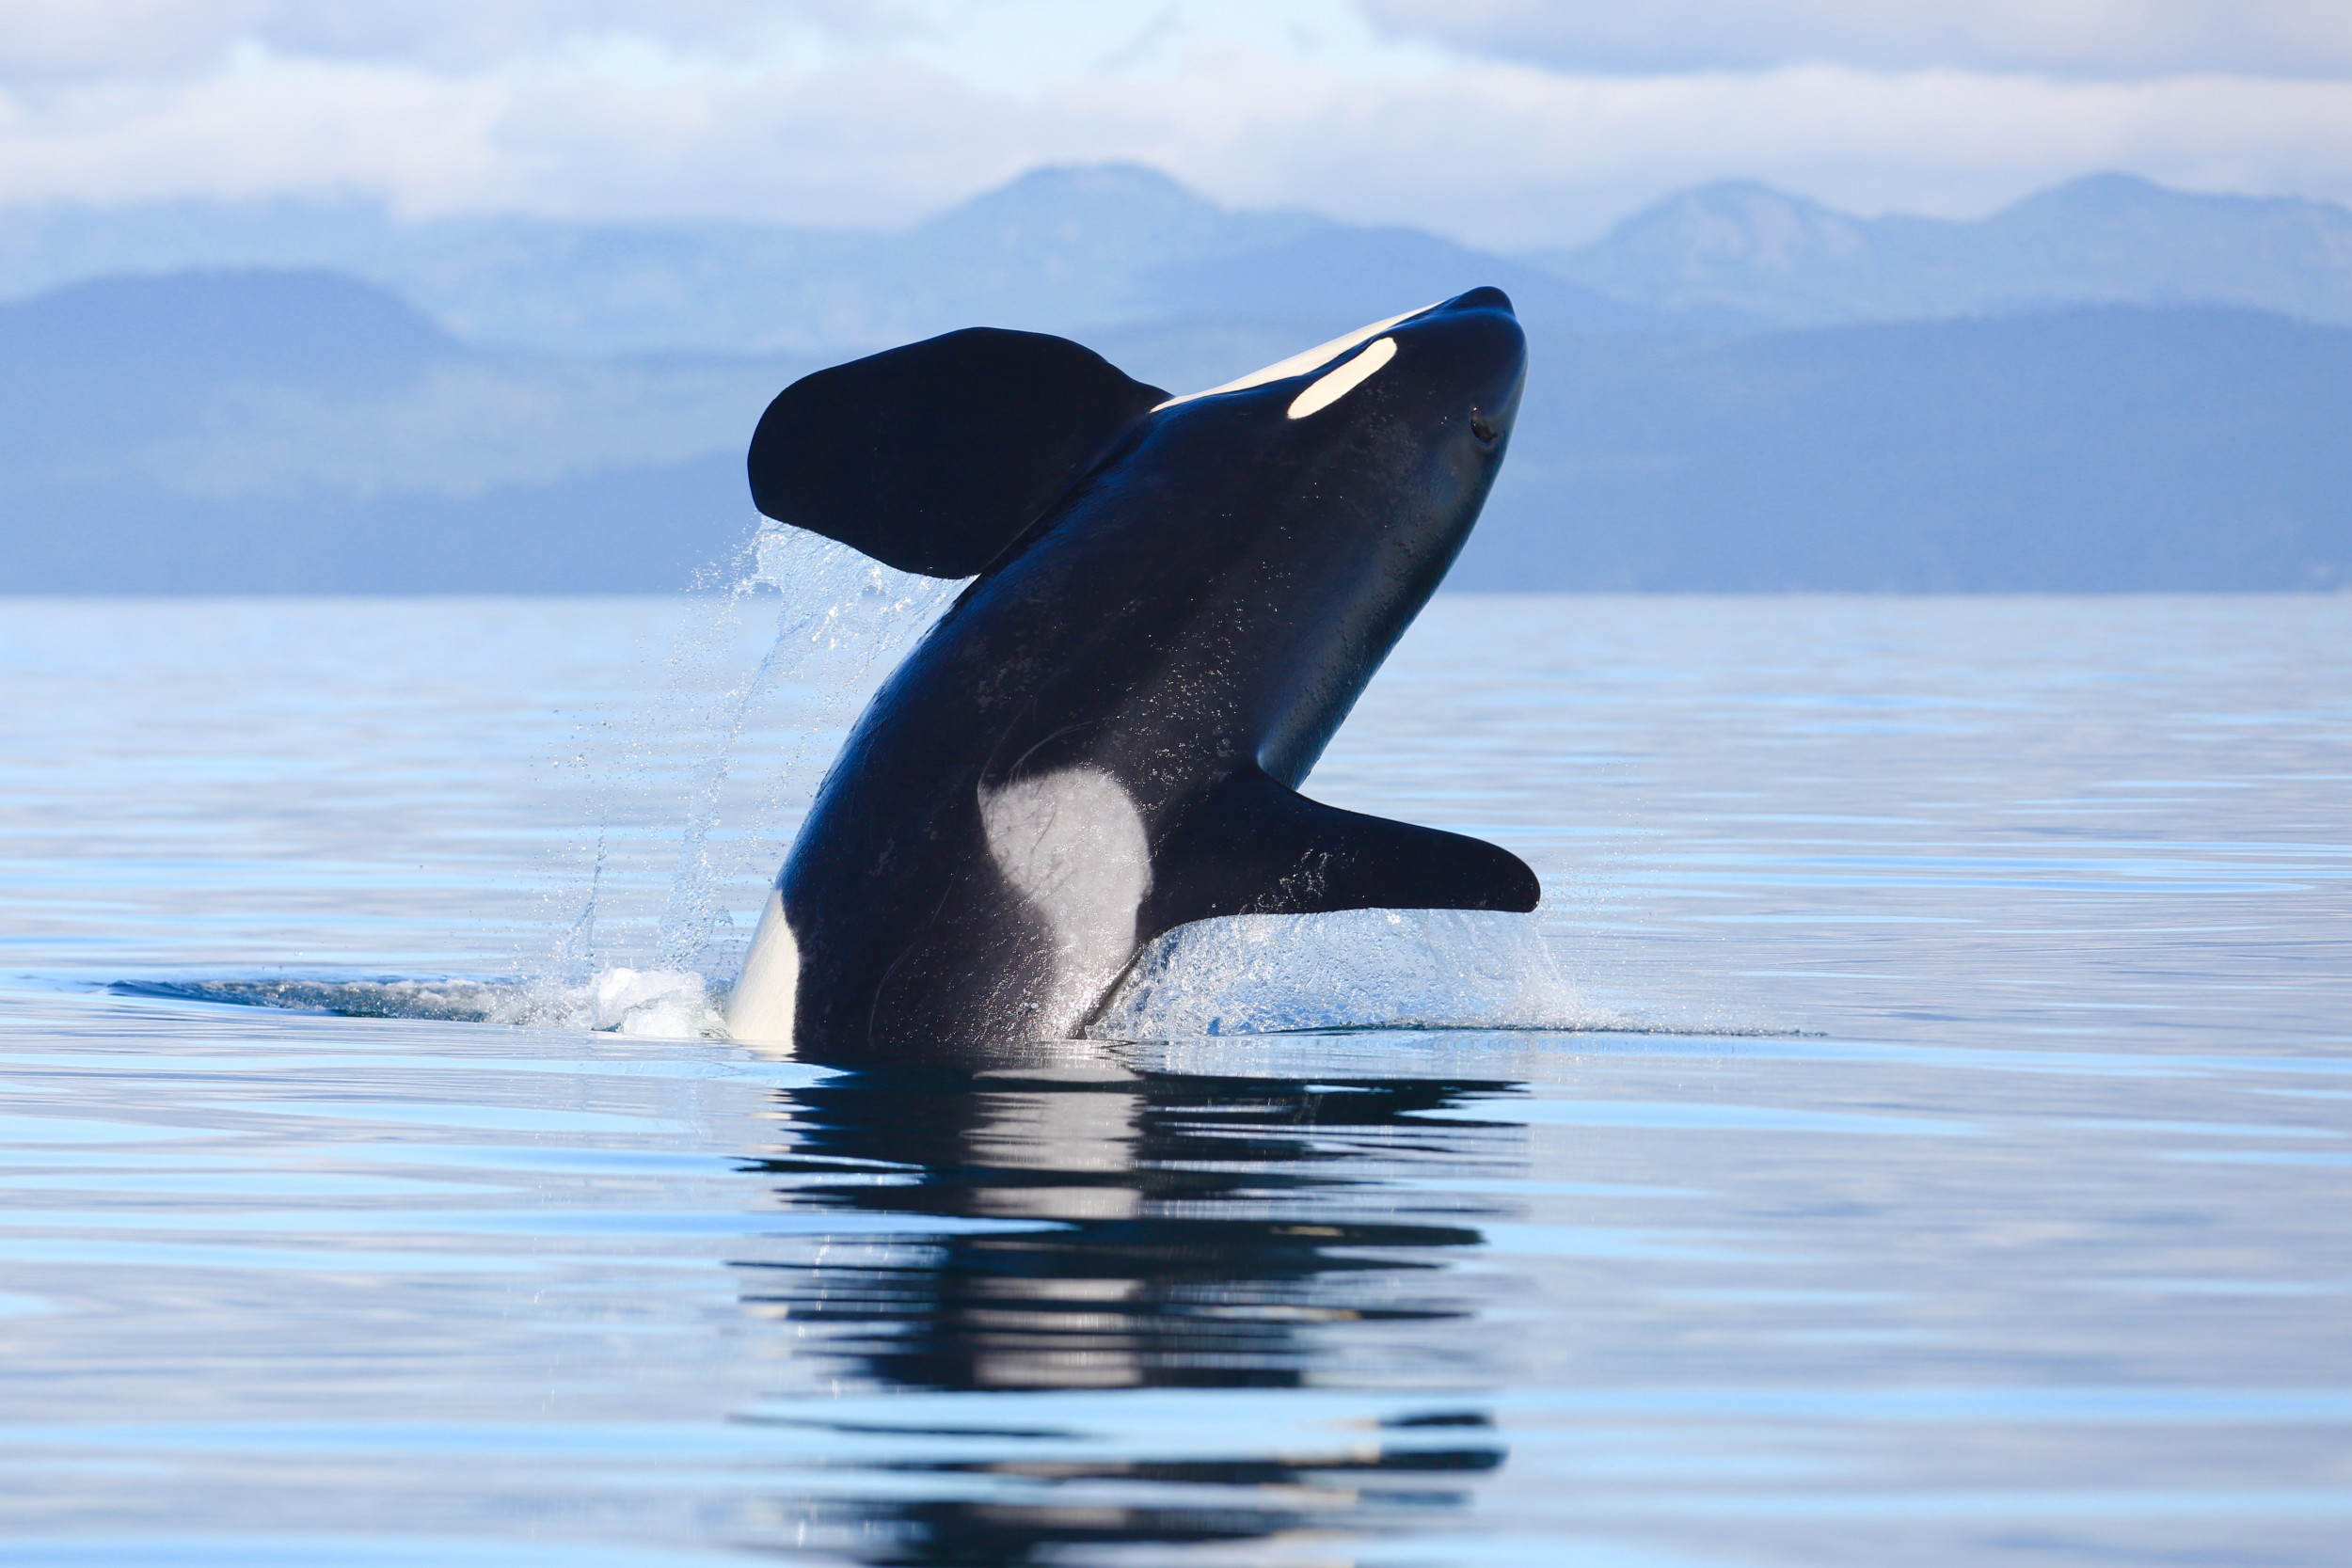 Rare White Killer Whale Spotted In Washington During Mass Orca Sighting A mass stranding of over 50 pilot whales occurred last week in west iceland's snaefellsnes peninsula. rare white killer whale spotted in